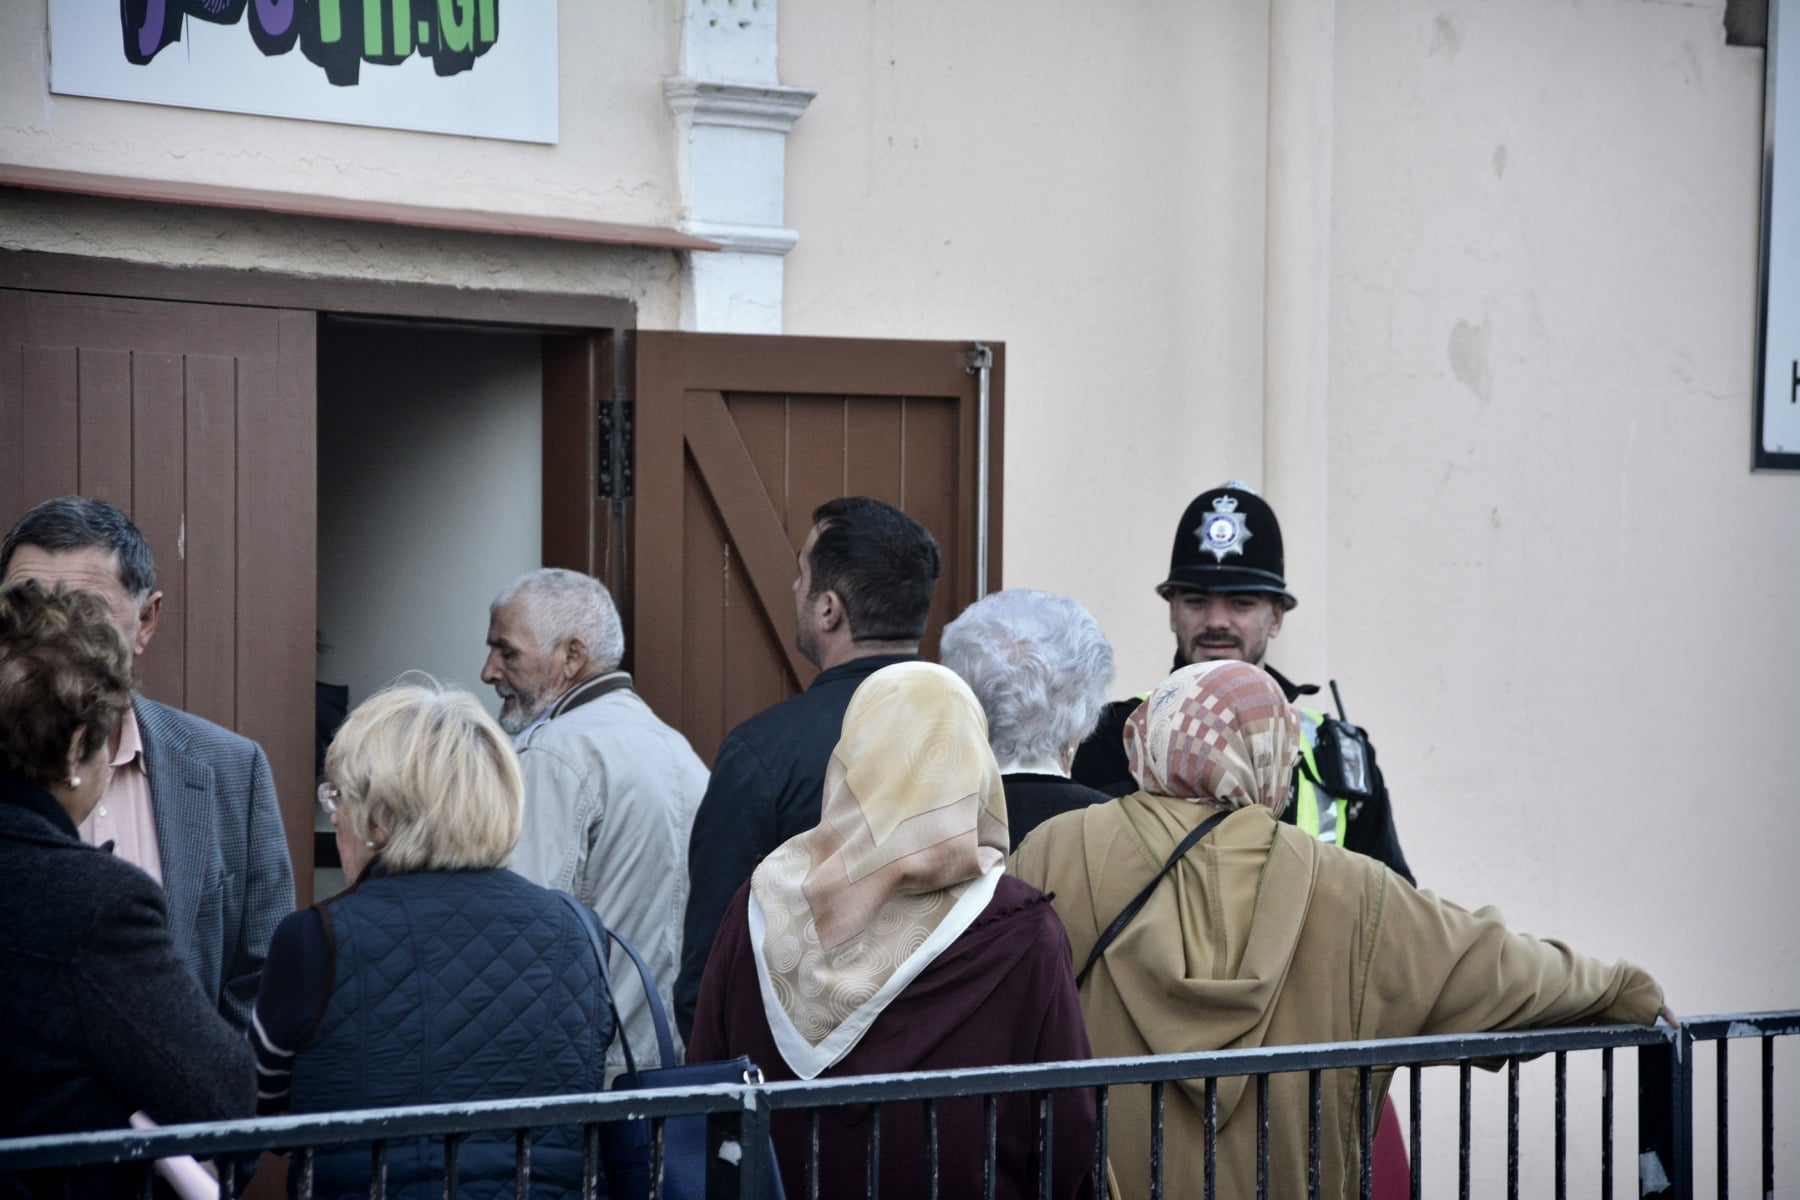 Gibraltar - 26th November 2015 - (Line Wall Road Polling station where tensions were high at one point this morning) - Police were today requested to make their presence known at the polling station by Line Wall Road after GSD activists handing leaflets outside the polling station are alleged to have made complaints over the use of the language used by a GSLP/Liberal activist handing leaflets to voters of Moroccan origins.According to reports received by Core Photography the GSD activists complained that the use of the native Moroccan language should not be allowed by those guiding voters outside the polling station, claiming the "official language in Gibraltar is English," according to witnesses present during the incident. This resulted in  tensions between the activists. Police were present to calm down the situation which has been played down as a minor incident. Executive members of the GSD approached over the incident have indicated that they were not at the time aware of such an incident, but have indicated that they would not support such actions and would be looking into the matter.No further known incidents have been reported throughout the day.Voting has been steady throughout the day, with politicians attending the polling stations throughout the morning as voters queue up to vote.The Commissioner of Police has attended polling stations to oversee security in person.